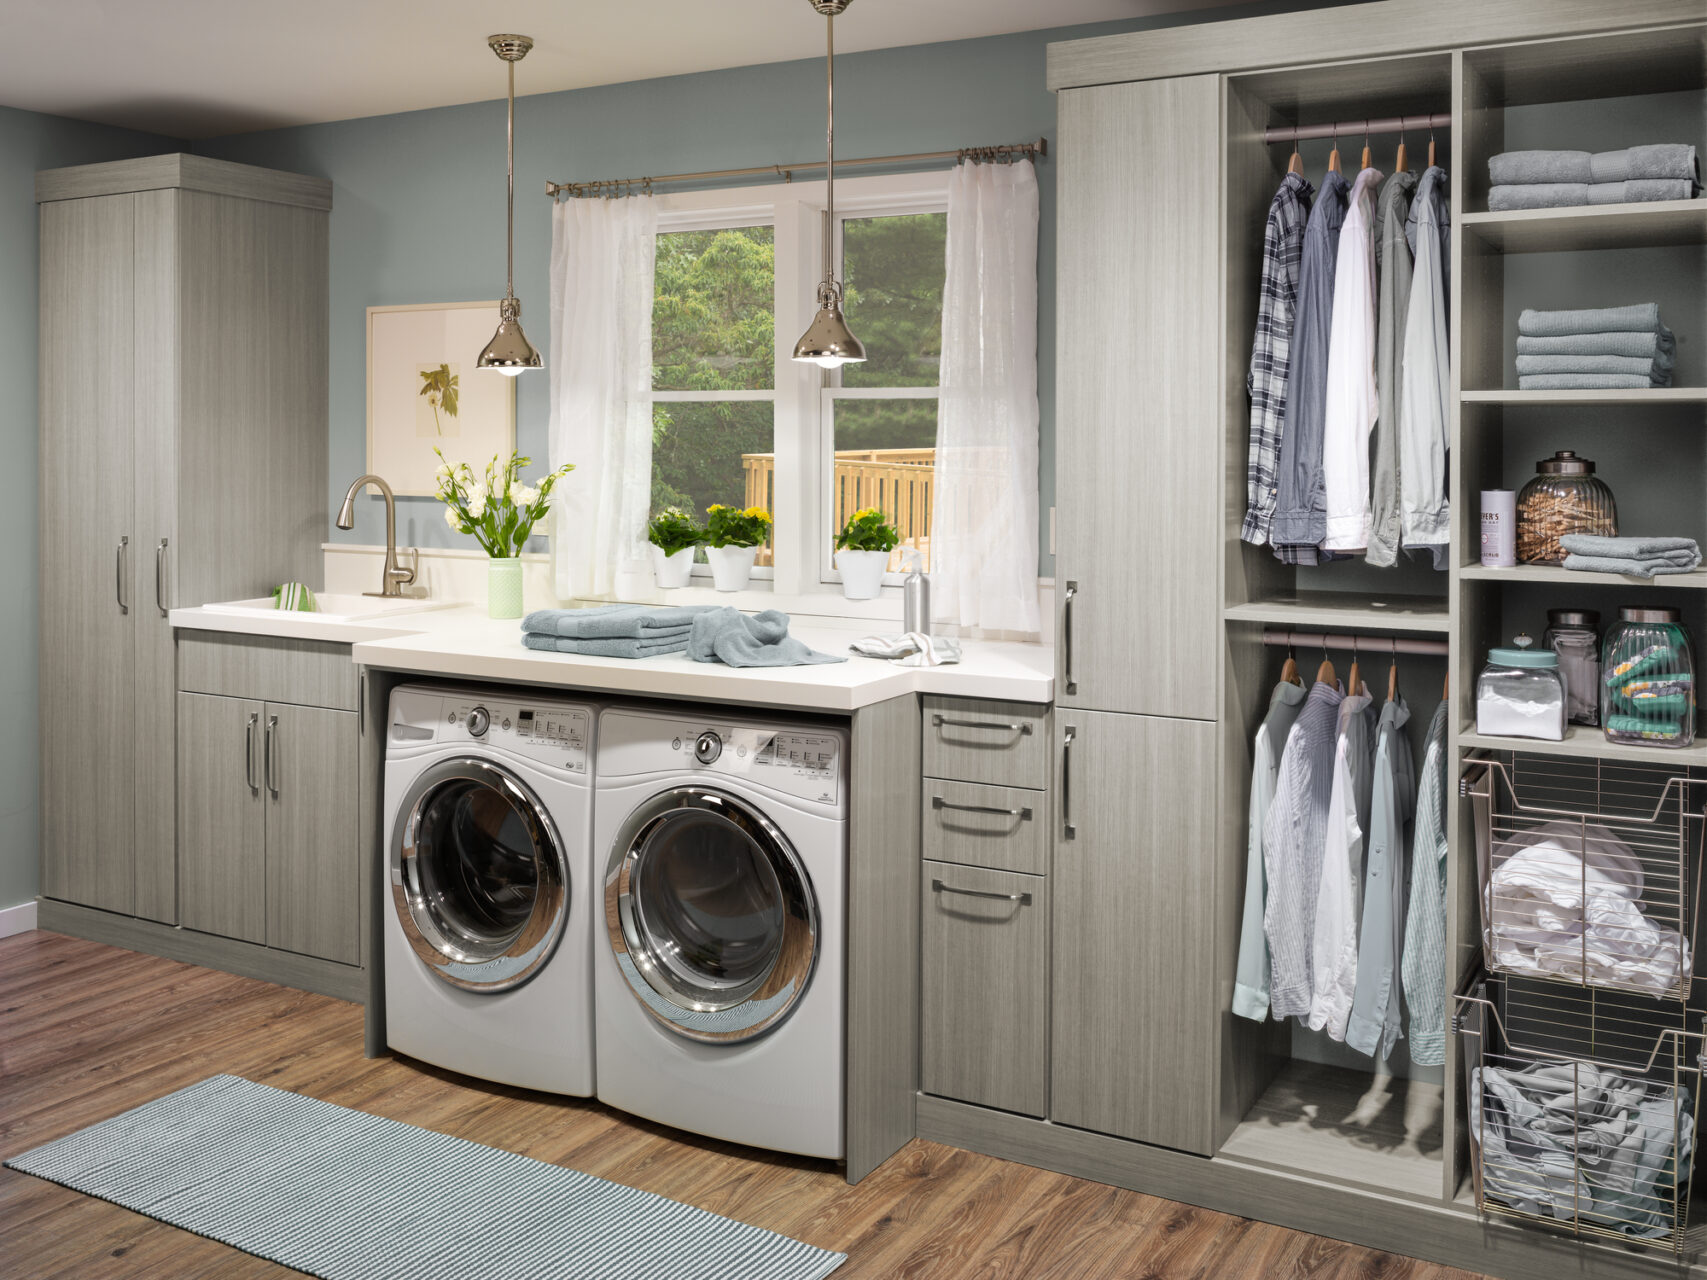 laundry room with cabinets, drawers, rods, shelves and wire baskets